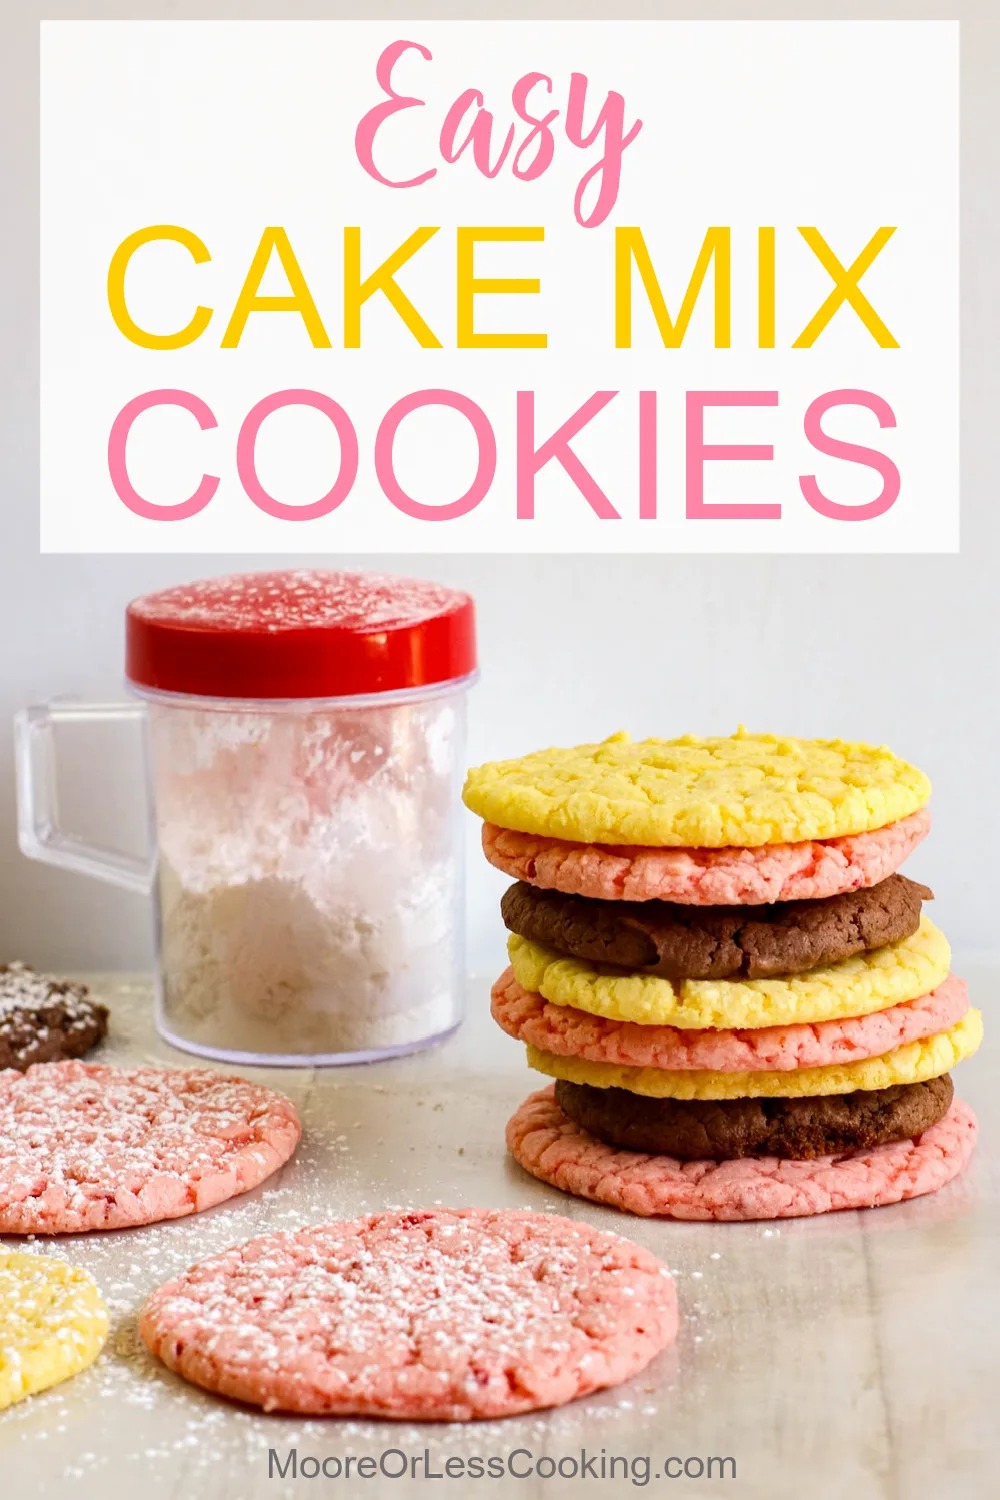 Bake a batch of delicious cookies with this 3-ingredient recipe that uses a boxed cake mix as a time-saving shortcut for the cookie dough. These cake mix cookies will be your new favorite way to make a sweet treat in under 20 minutes! via @Mooreorlesscook